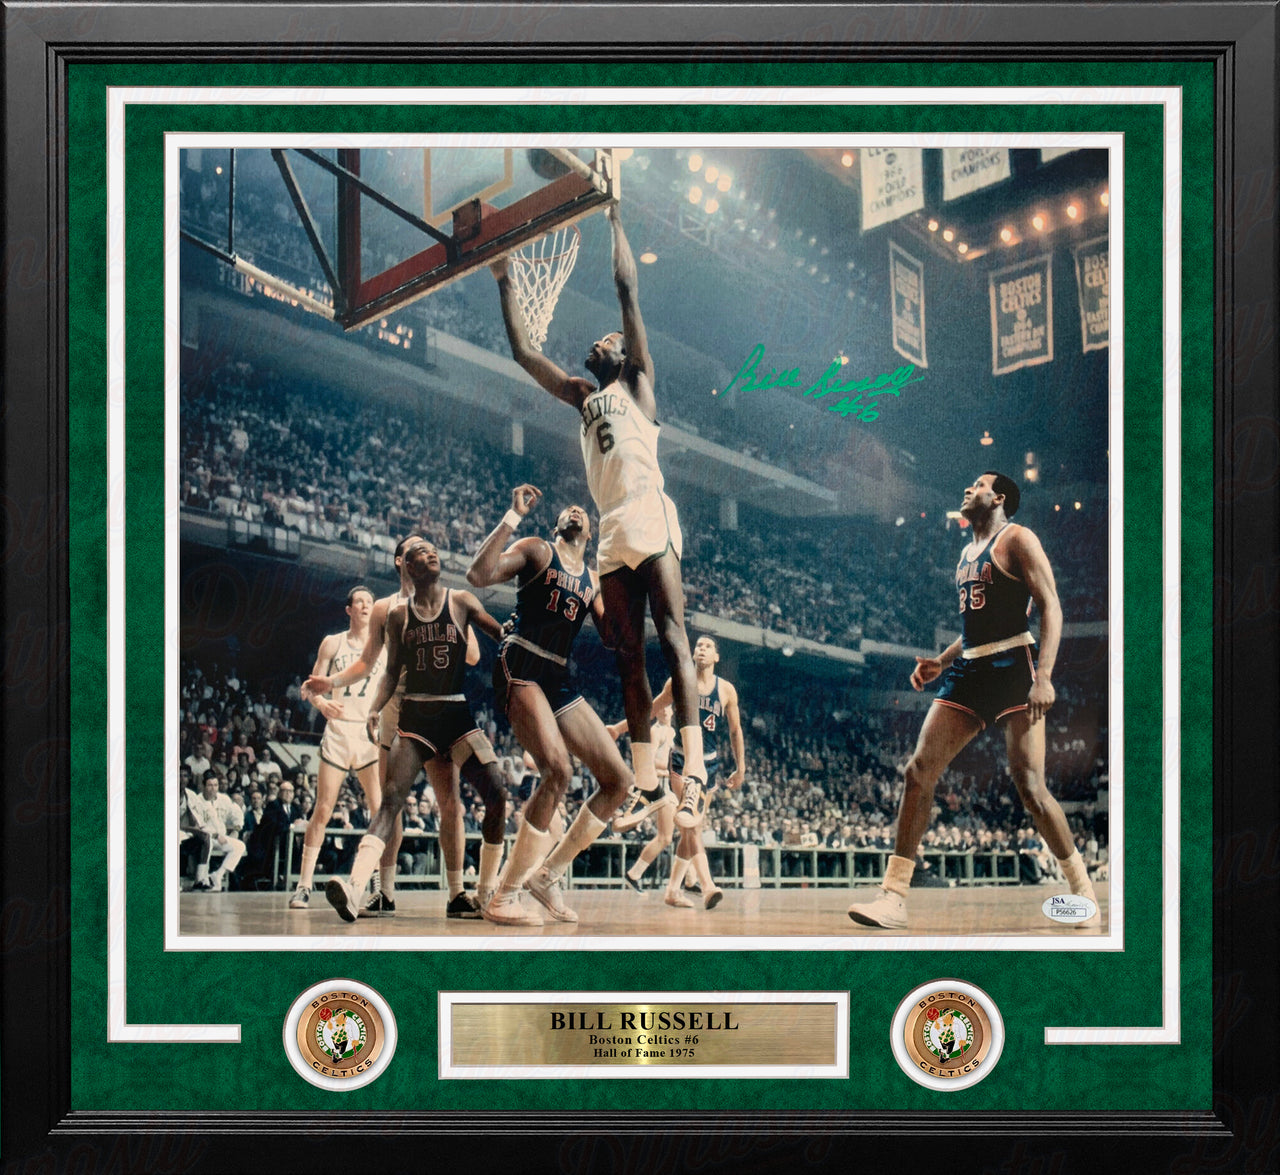 Bill Russell at the Rim Boston Celtics Autographed 16" x 20" Framed Basketball Photo - Dynasty Sports & Framing 